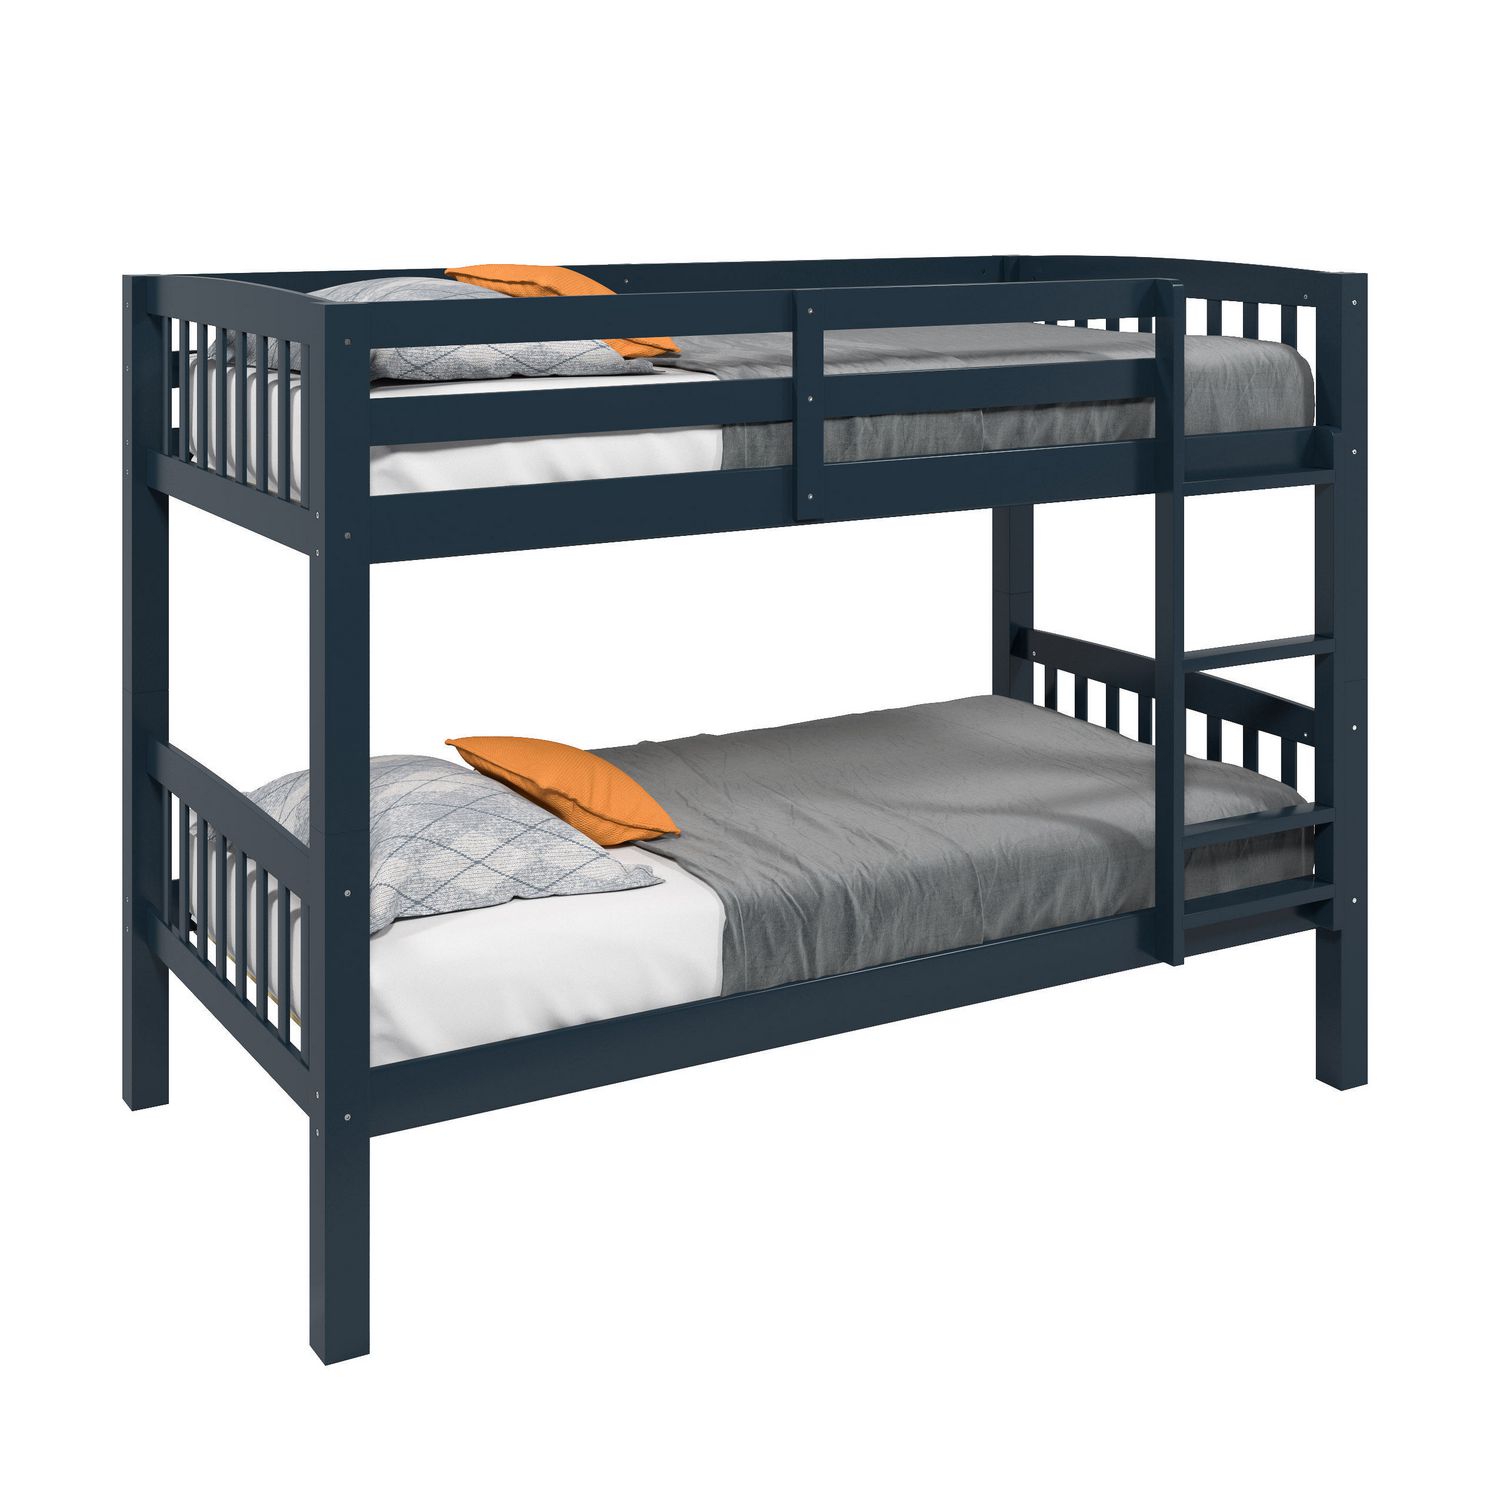 Painted Wood Bunk Bed, Painted Bunk Beds